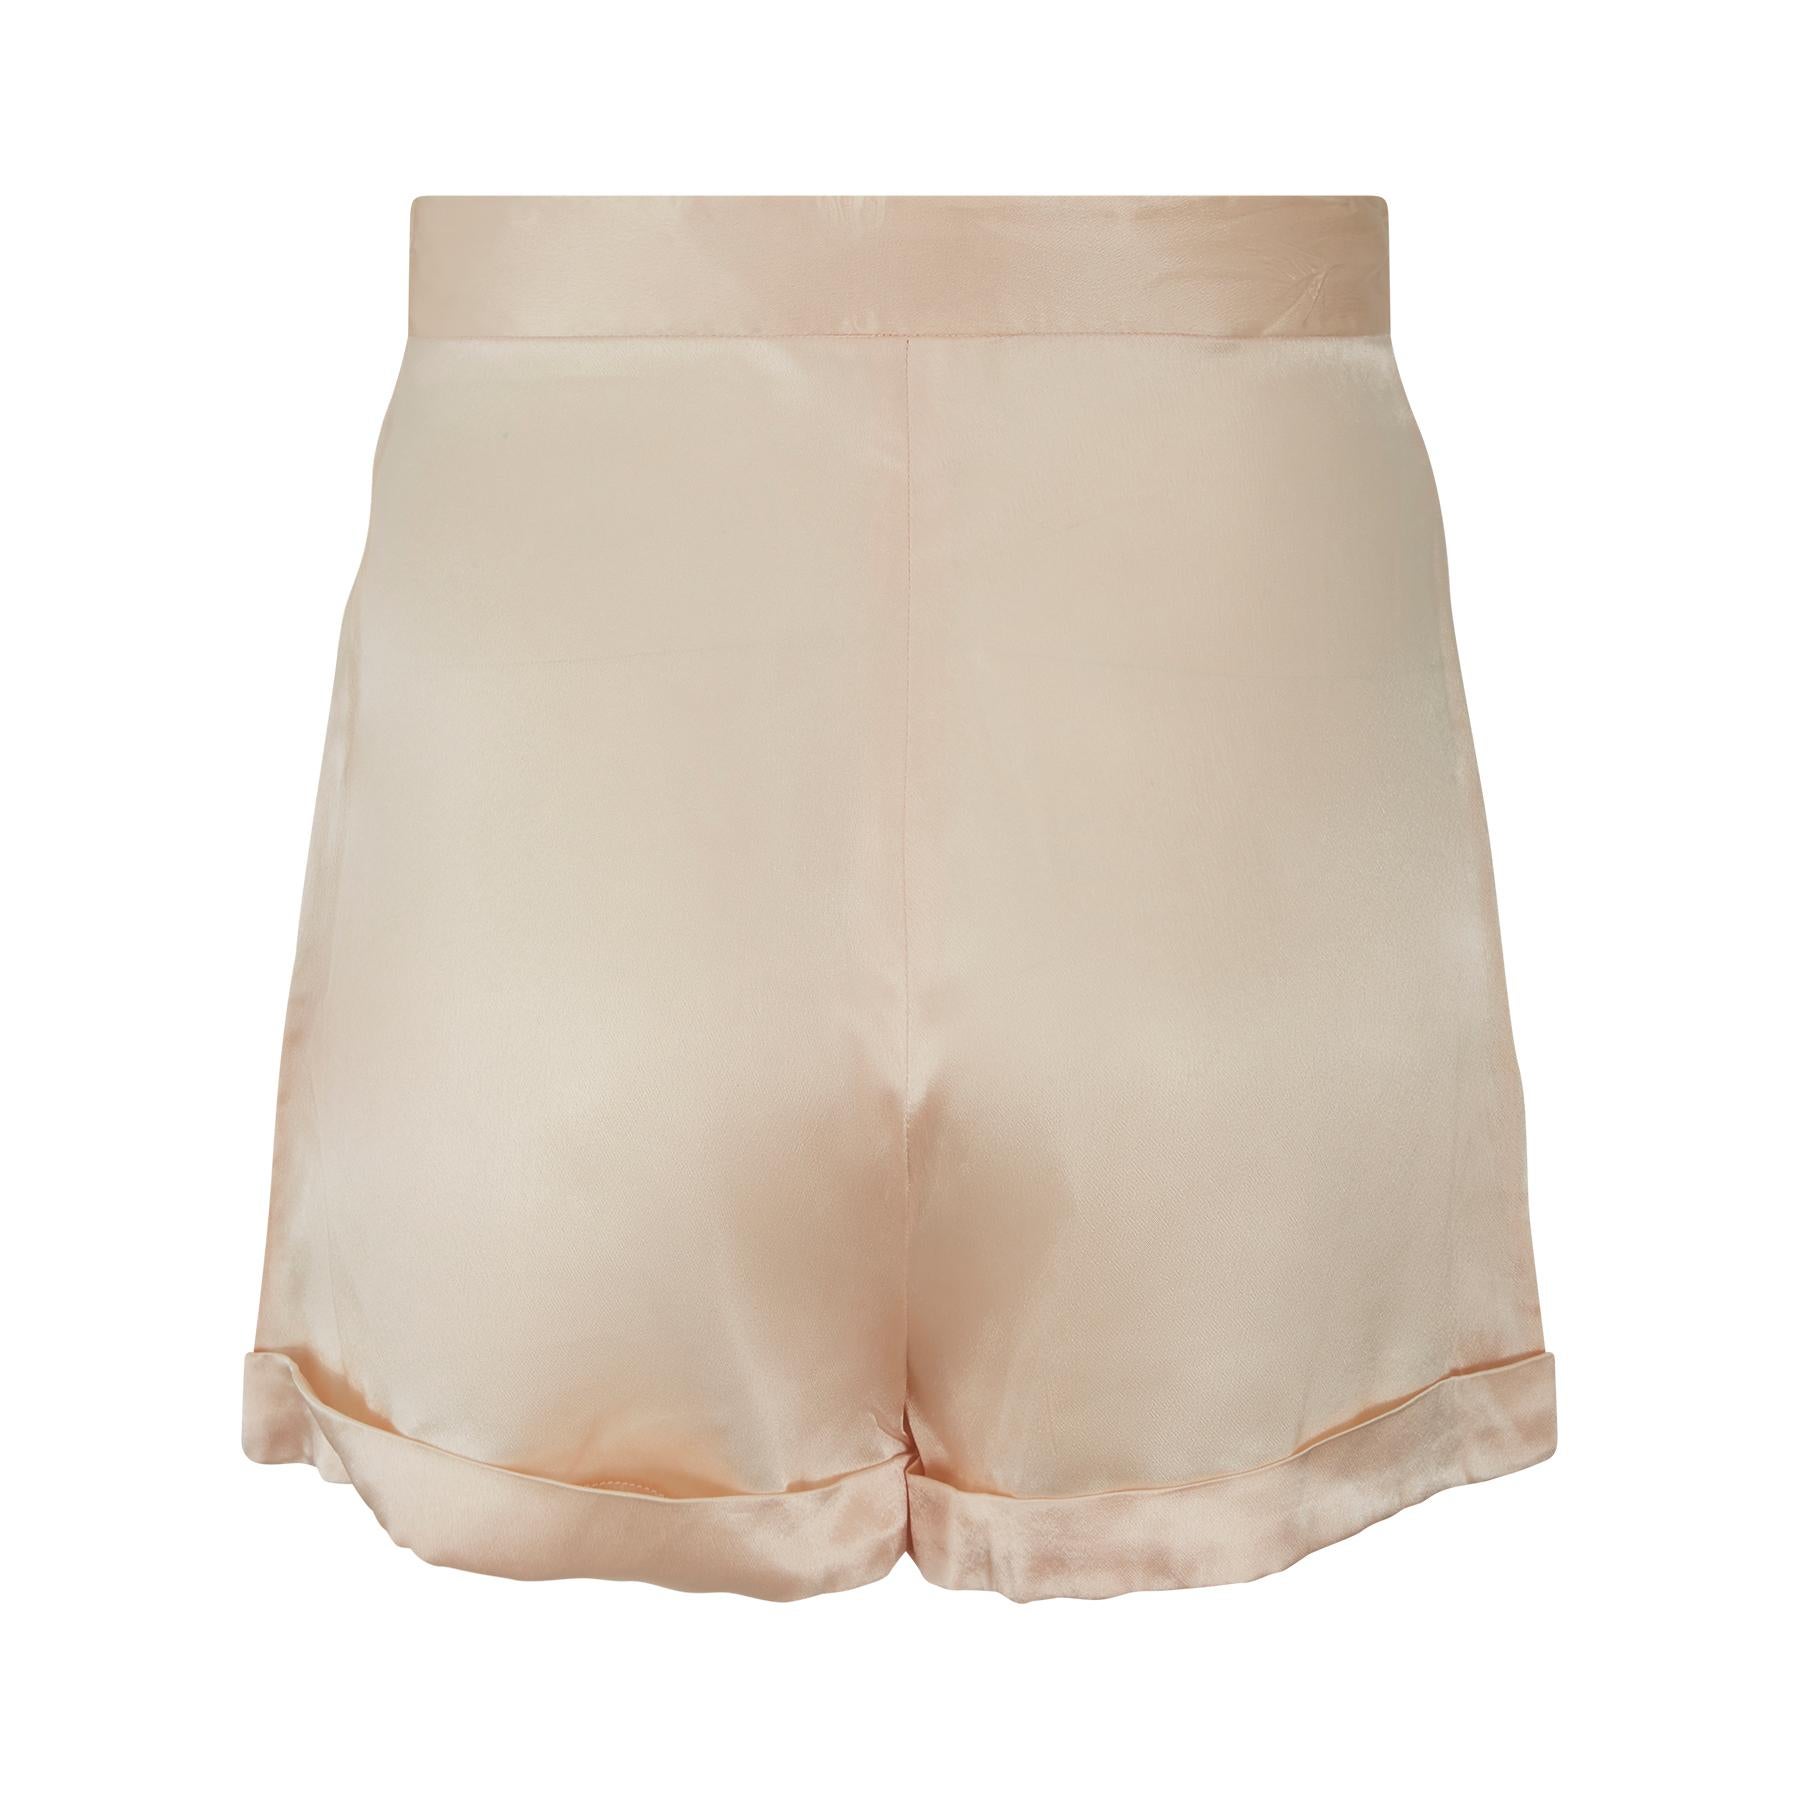 These original early 1970s shorts are a great example of what the famous London boutique Quorum did best - sexy loungewear. The sleek high waisted look is based on earlier 1930s tap pants. Ossie Clark, the most famous of the Quorum designers, based